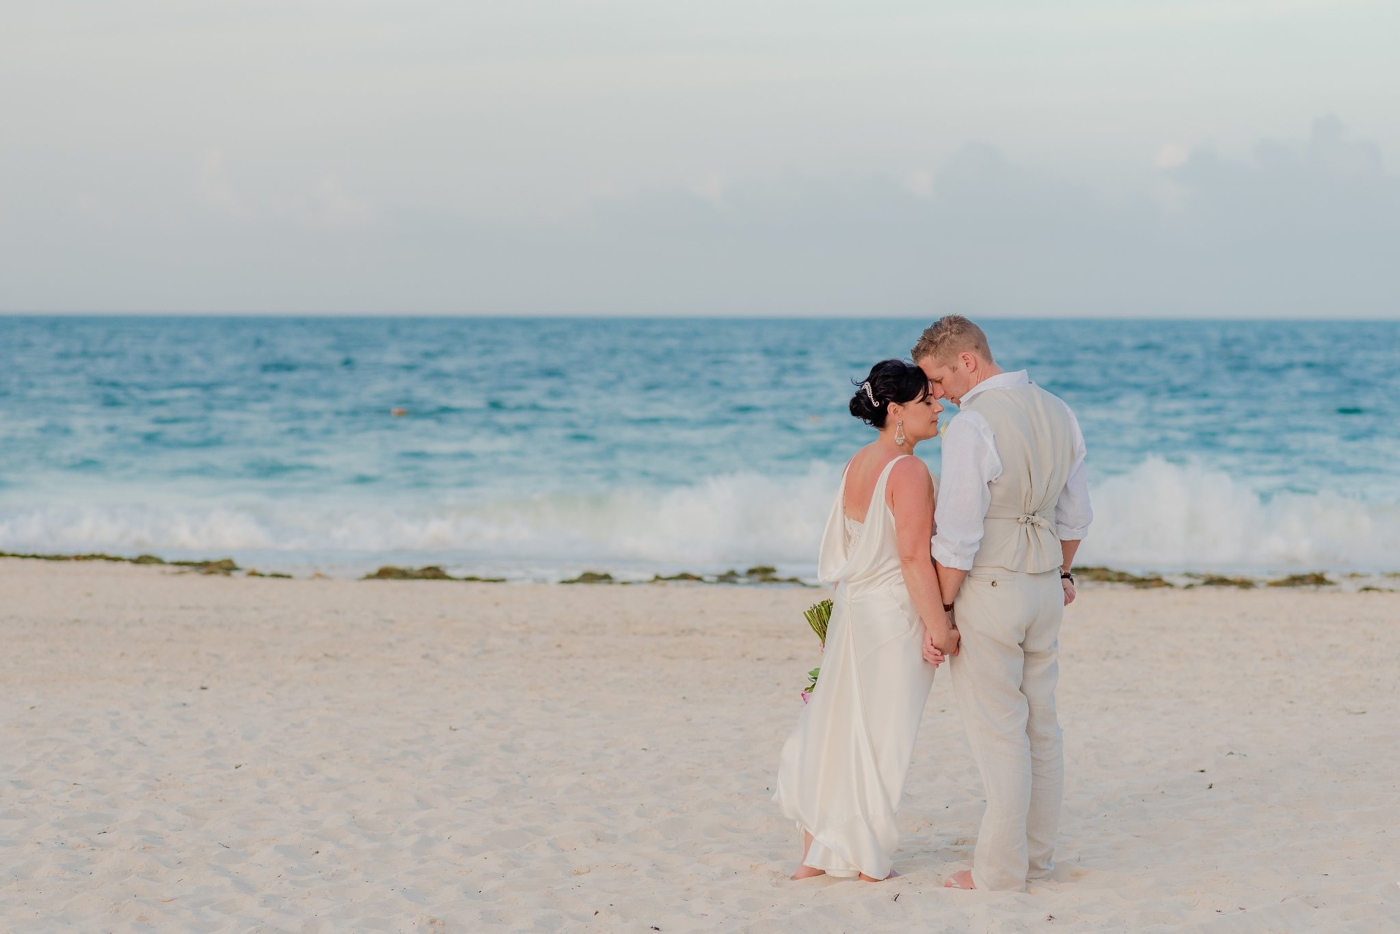 Bride and groom portraits on the beach in Costa Mujeres